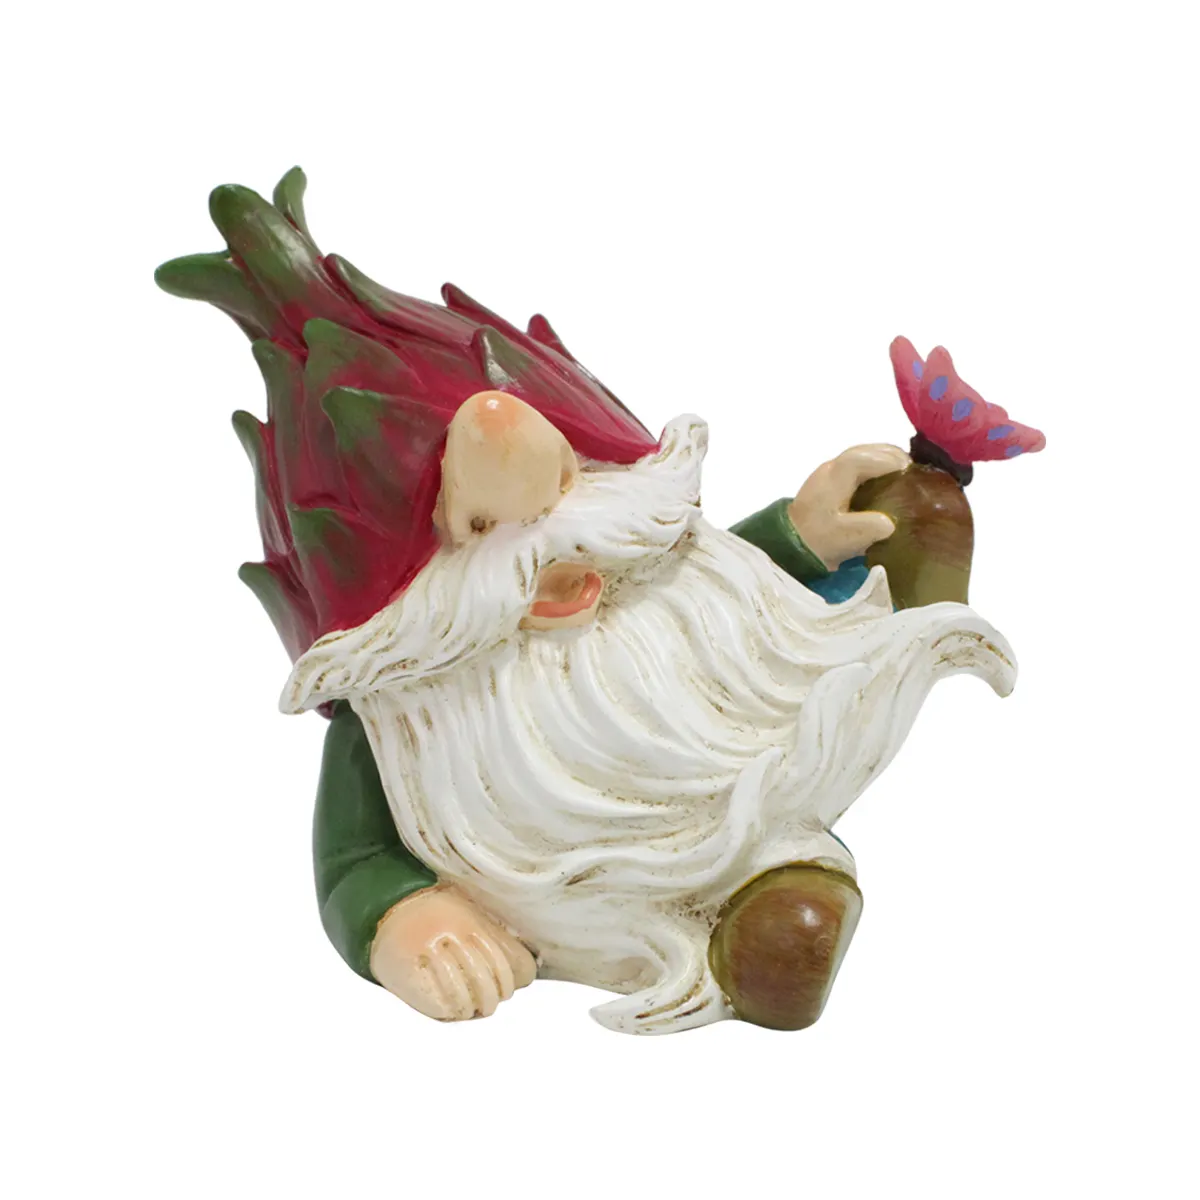 Creative Resin Garden Gnome Statue With Dragon Fruit Hat Outdoor Yard Lawn Decoration